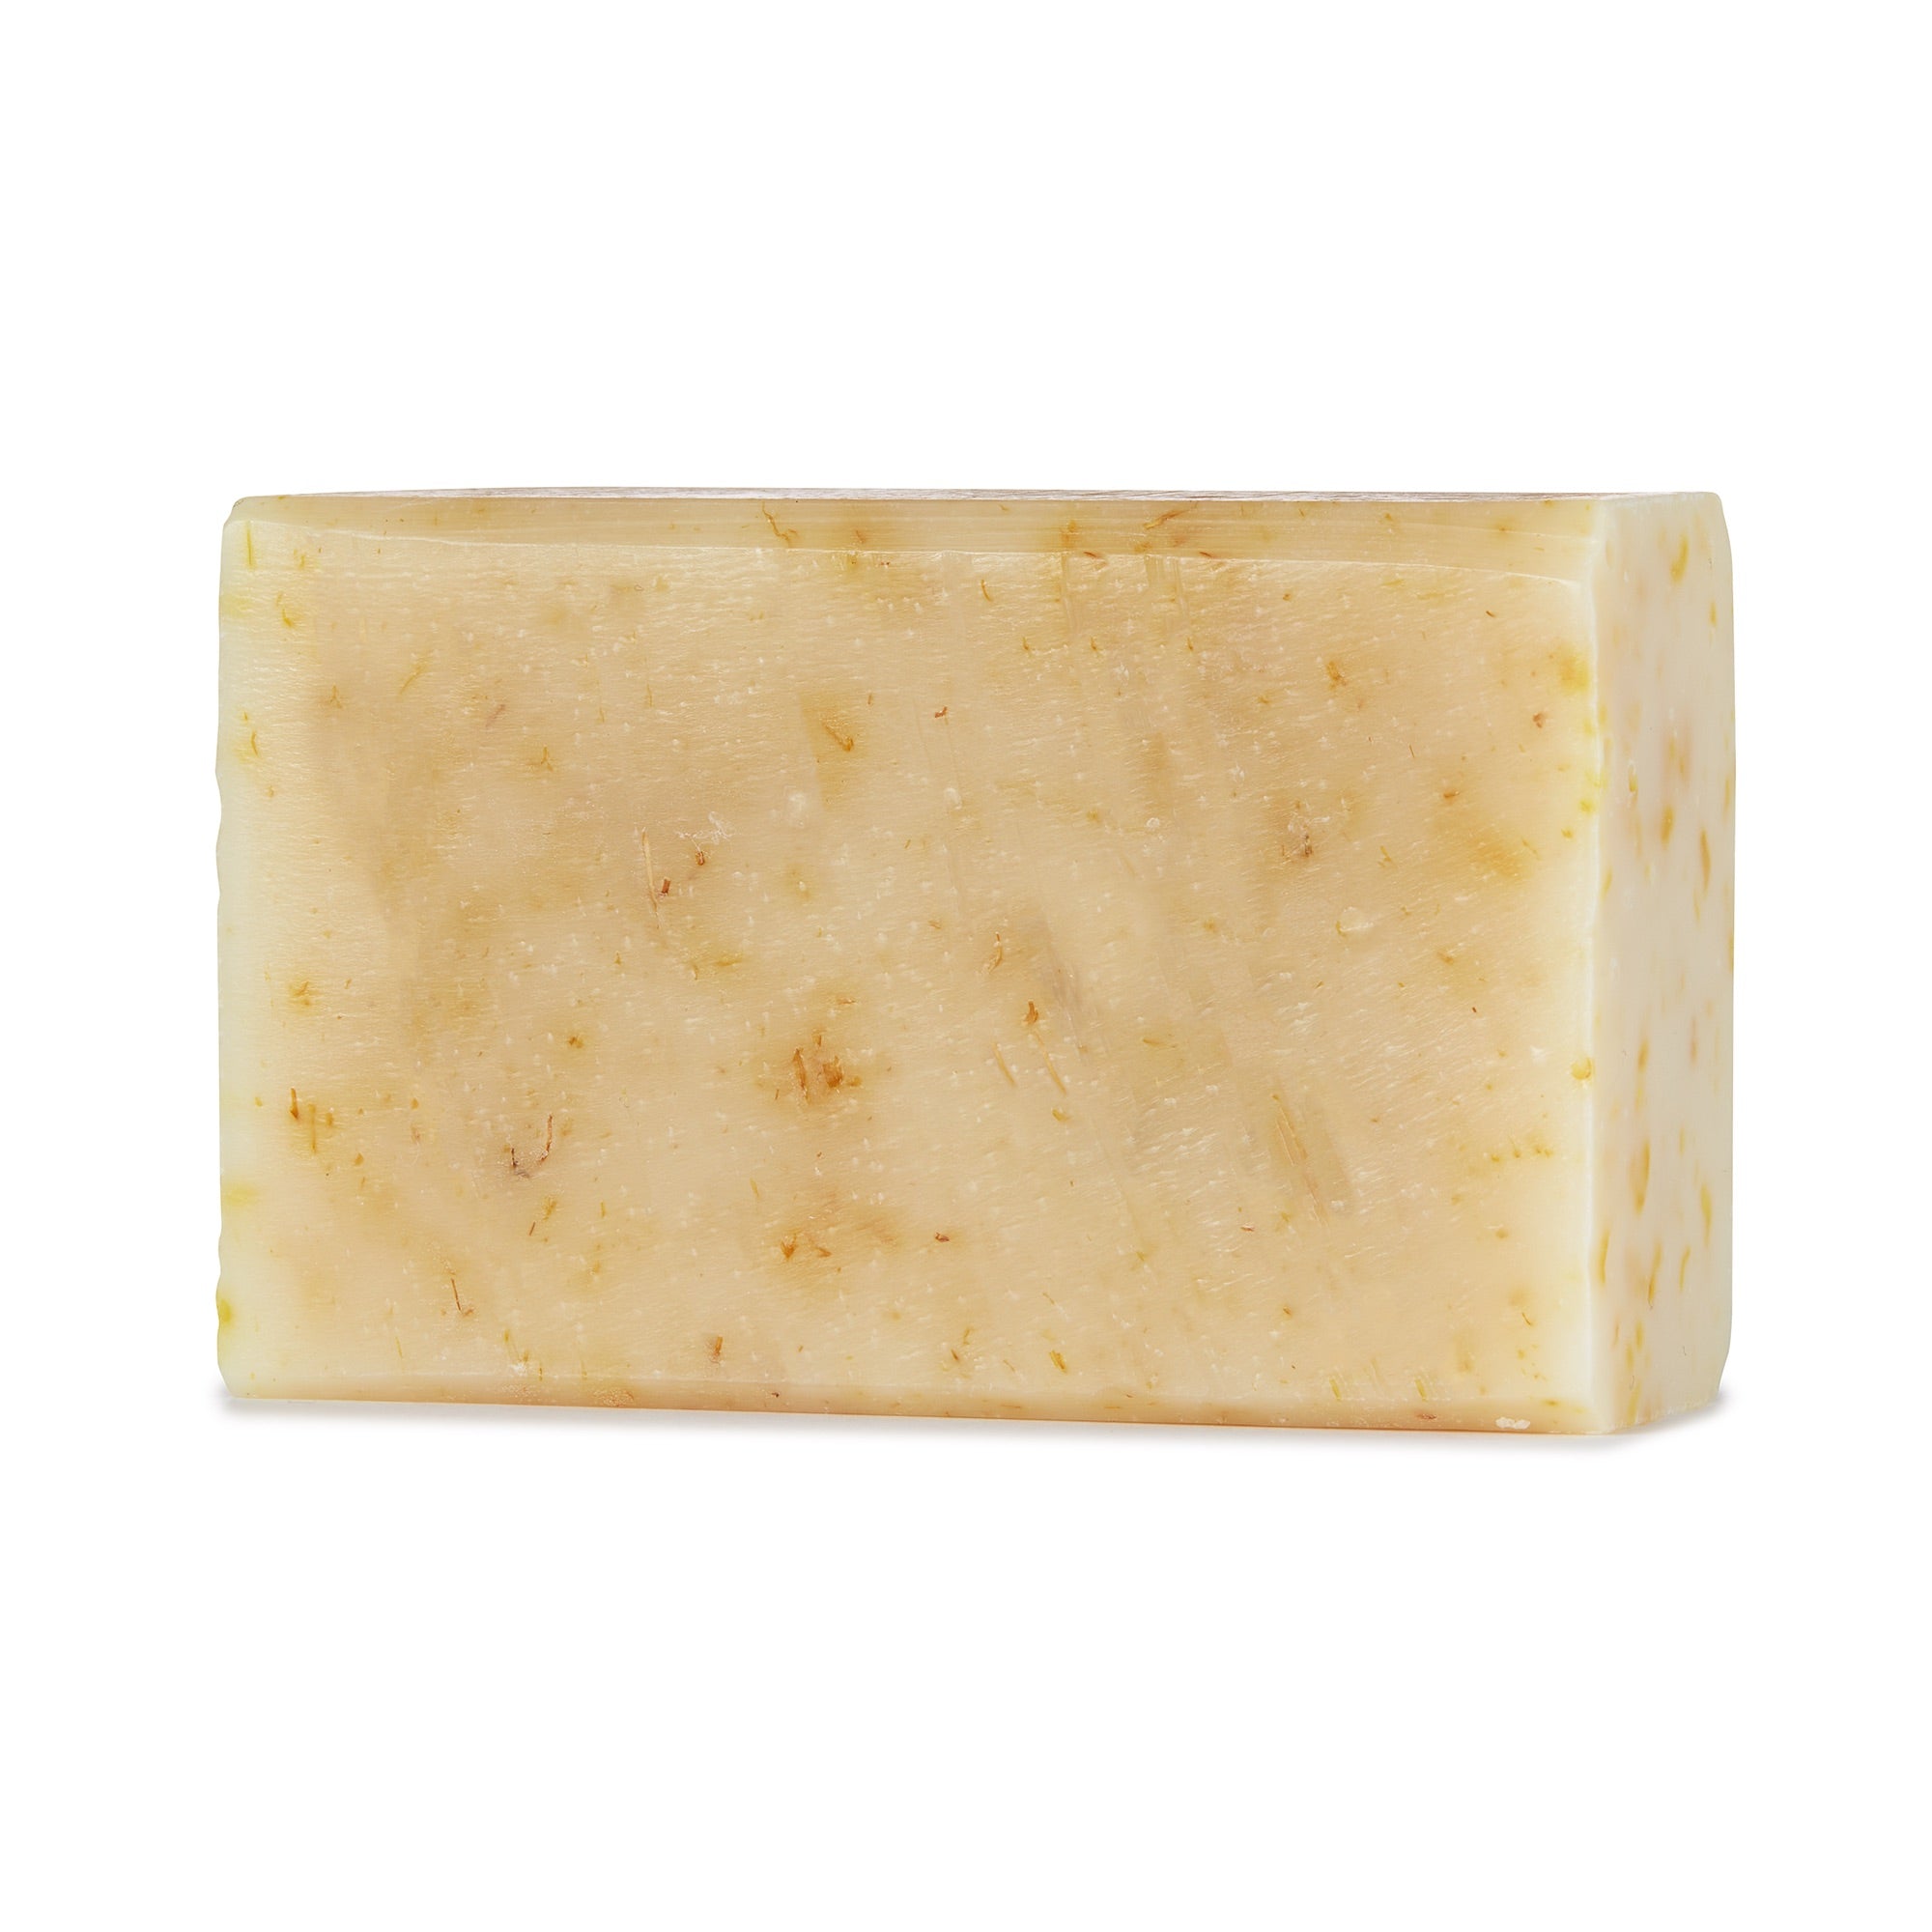 Image of the Bia Unscented bar soap